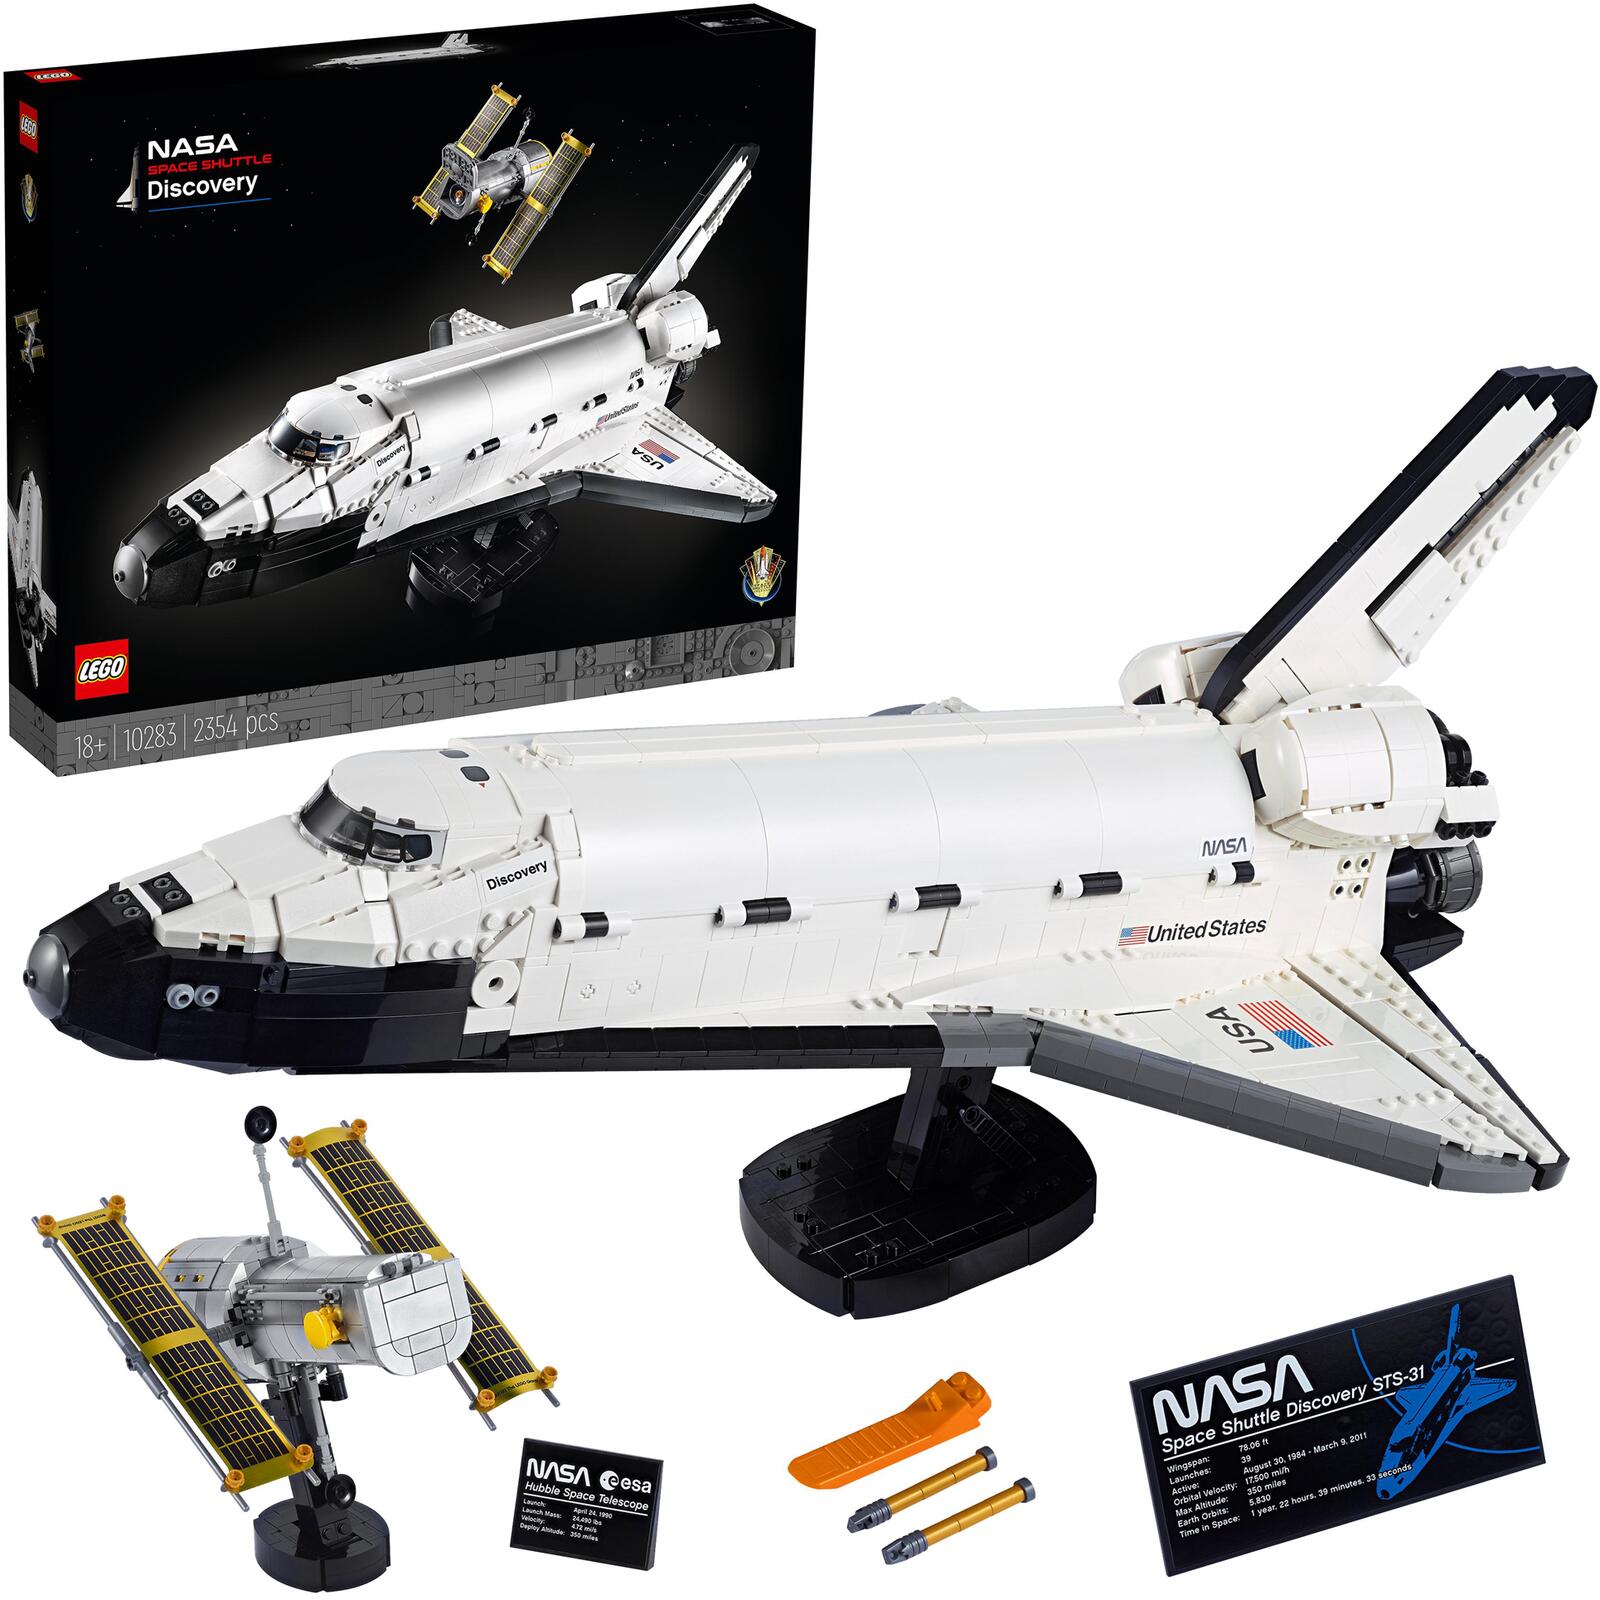 LEGO Icons NASA-Spaceshuttle "Discovery" 10283